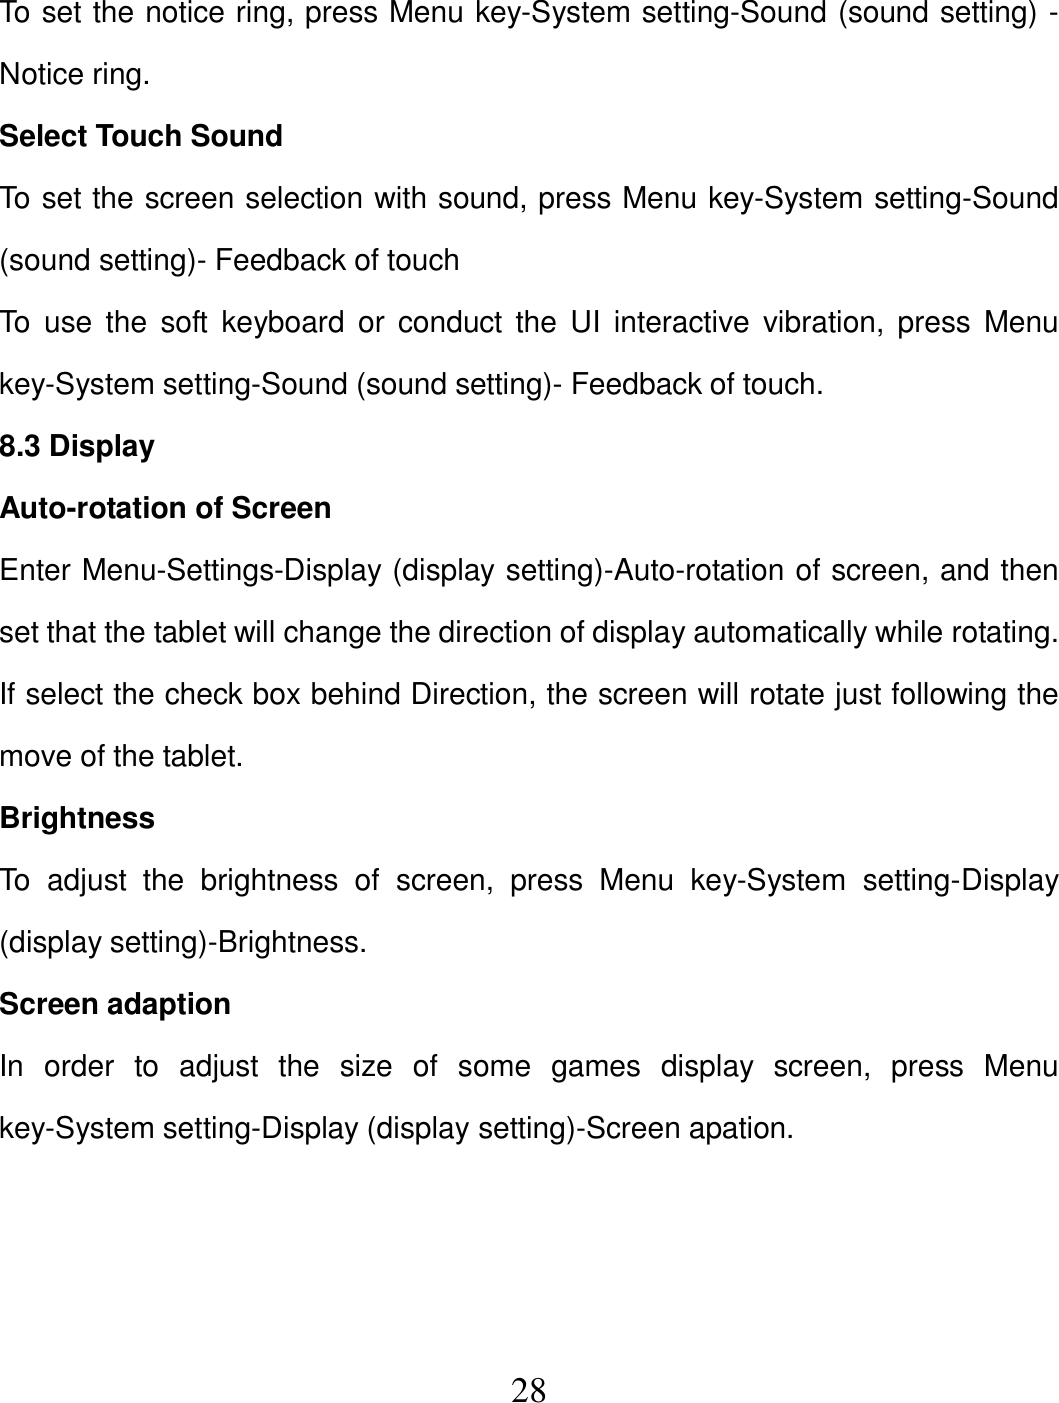   28 To set the notice ring, press Menu key-System setting-Sound (sound setting) - Notice ring. Select Touch Sound To set the screen selection with sound, press Menu key-System setting-Sound (sound setting)- Feedback of touch To  use  the soft  keyboard  or  conduct  the  UI  interactive vibration, press  Menu key-System setting-Sound (sound setting)- Feedback of touch. 8.3 Display Auto-rotation of Screen Enter Menu-Settings-Display (display setting)-Auto-rotation of screen, and then set that the tablet will change the direction of display automatically while rotating. If select the check box behind Direction, the screen will rotate just following the move of the tablet. Brightness To  adjust  the  brightness  of  screen,  press  Menu  key-System  setting-Display (display setting)-Brightness. Screen adaption In  order  to  adjust  the  size  of  some  games  display  screen,  press  Menu key-System setting-Display (display setting)-Screen apation.    